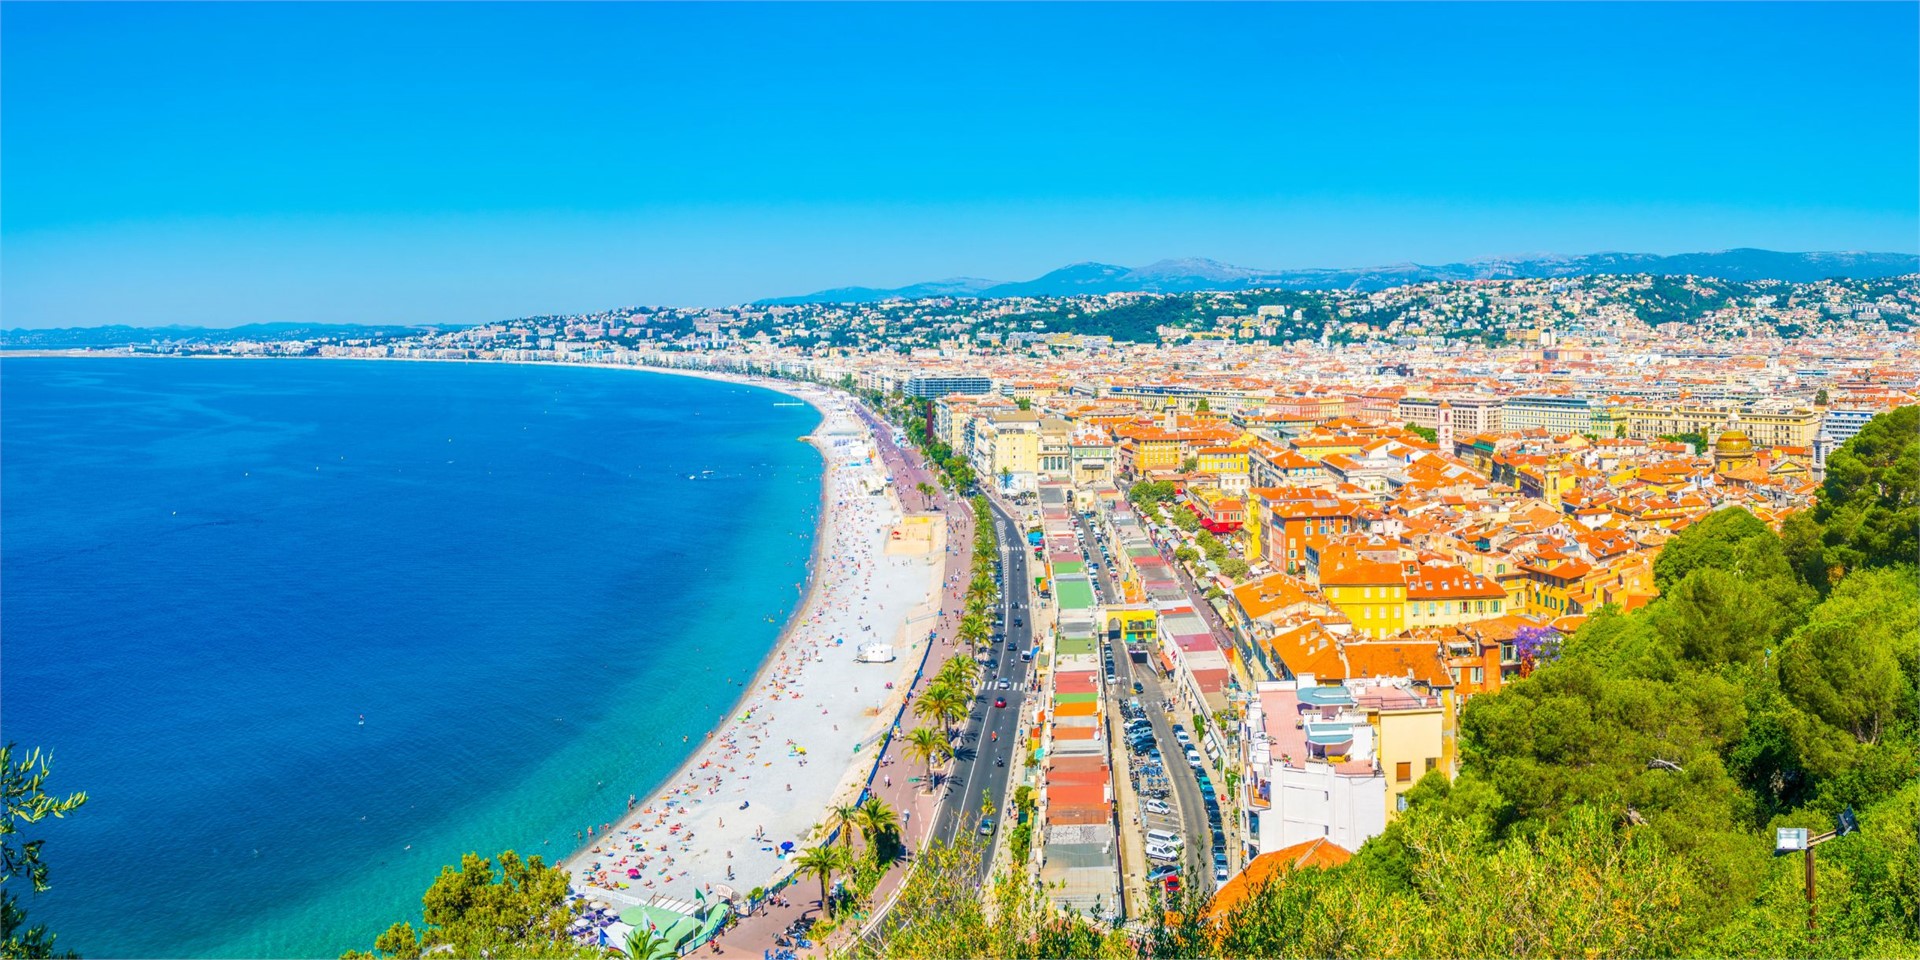 Hotels and accommodation in Nice, France
